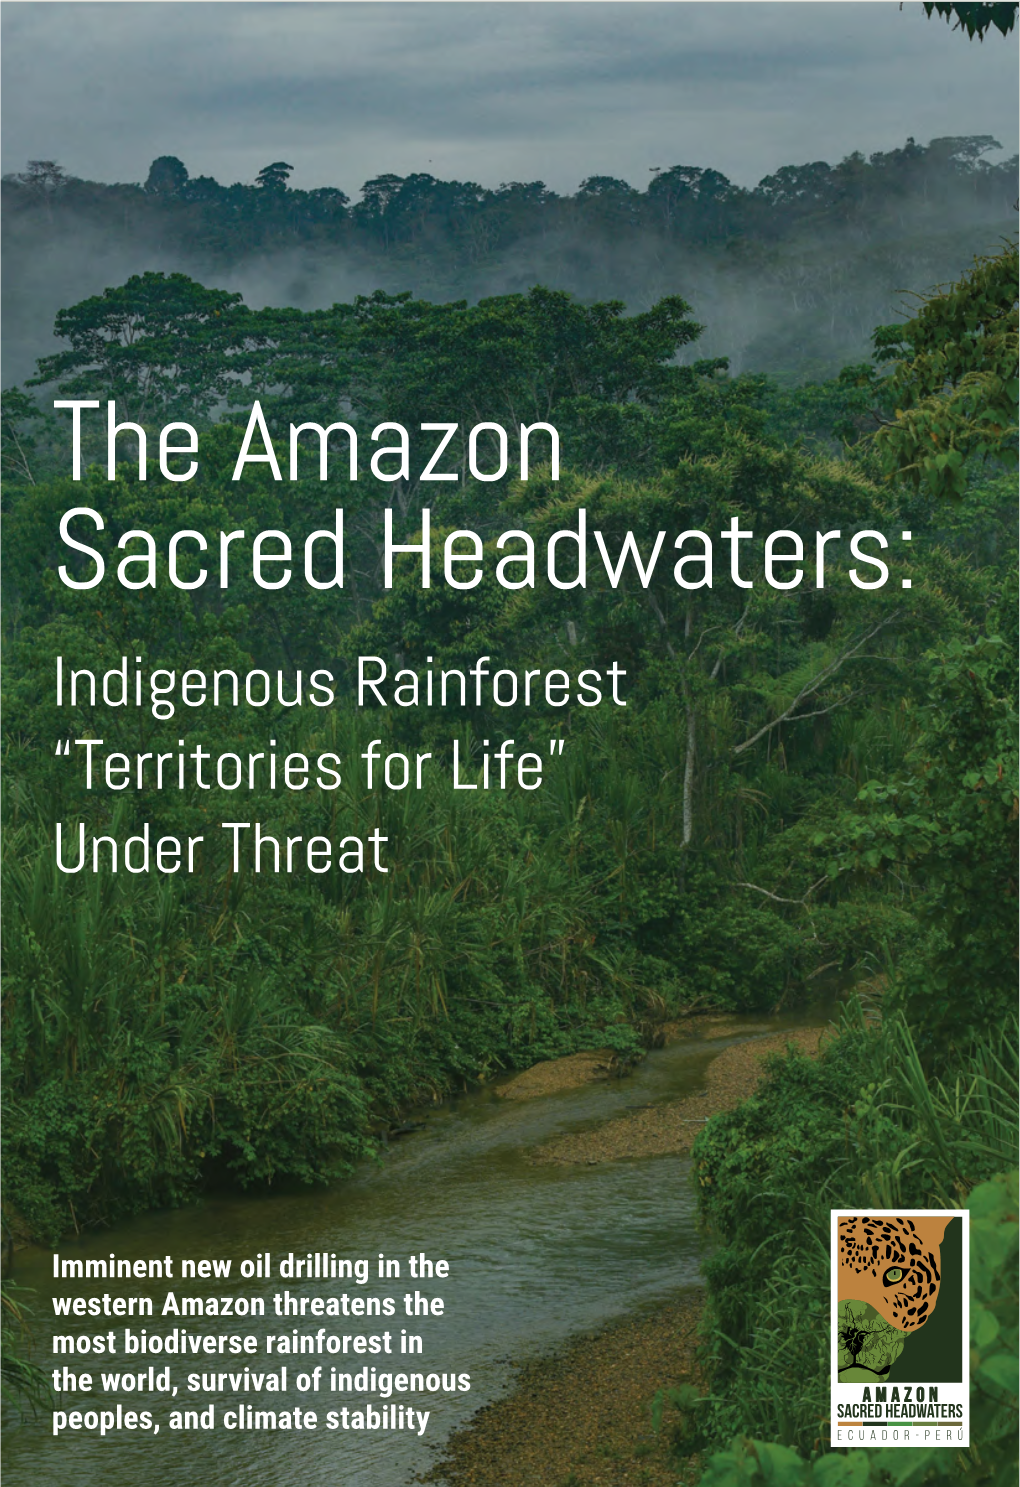 The Amazon Sacred Headwaters: Indigenous Rainforest “Territories for Life” Under Threat